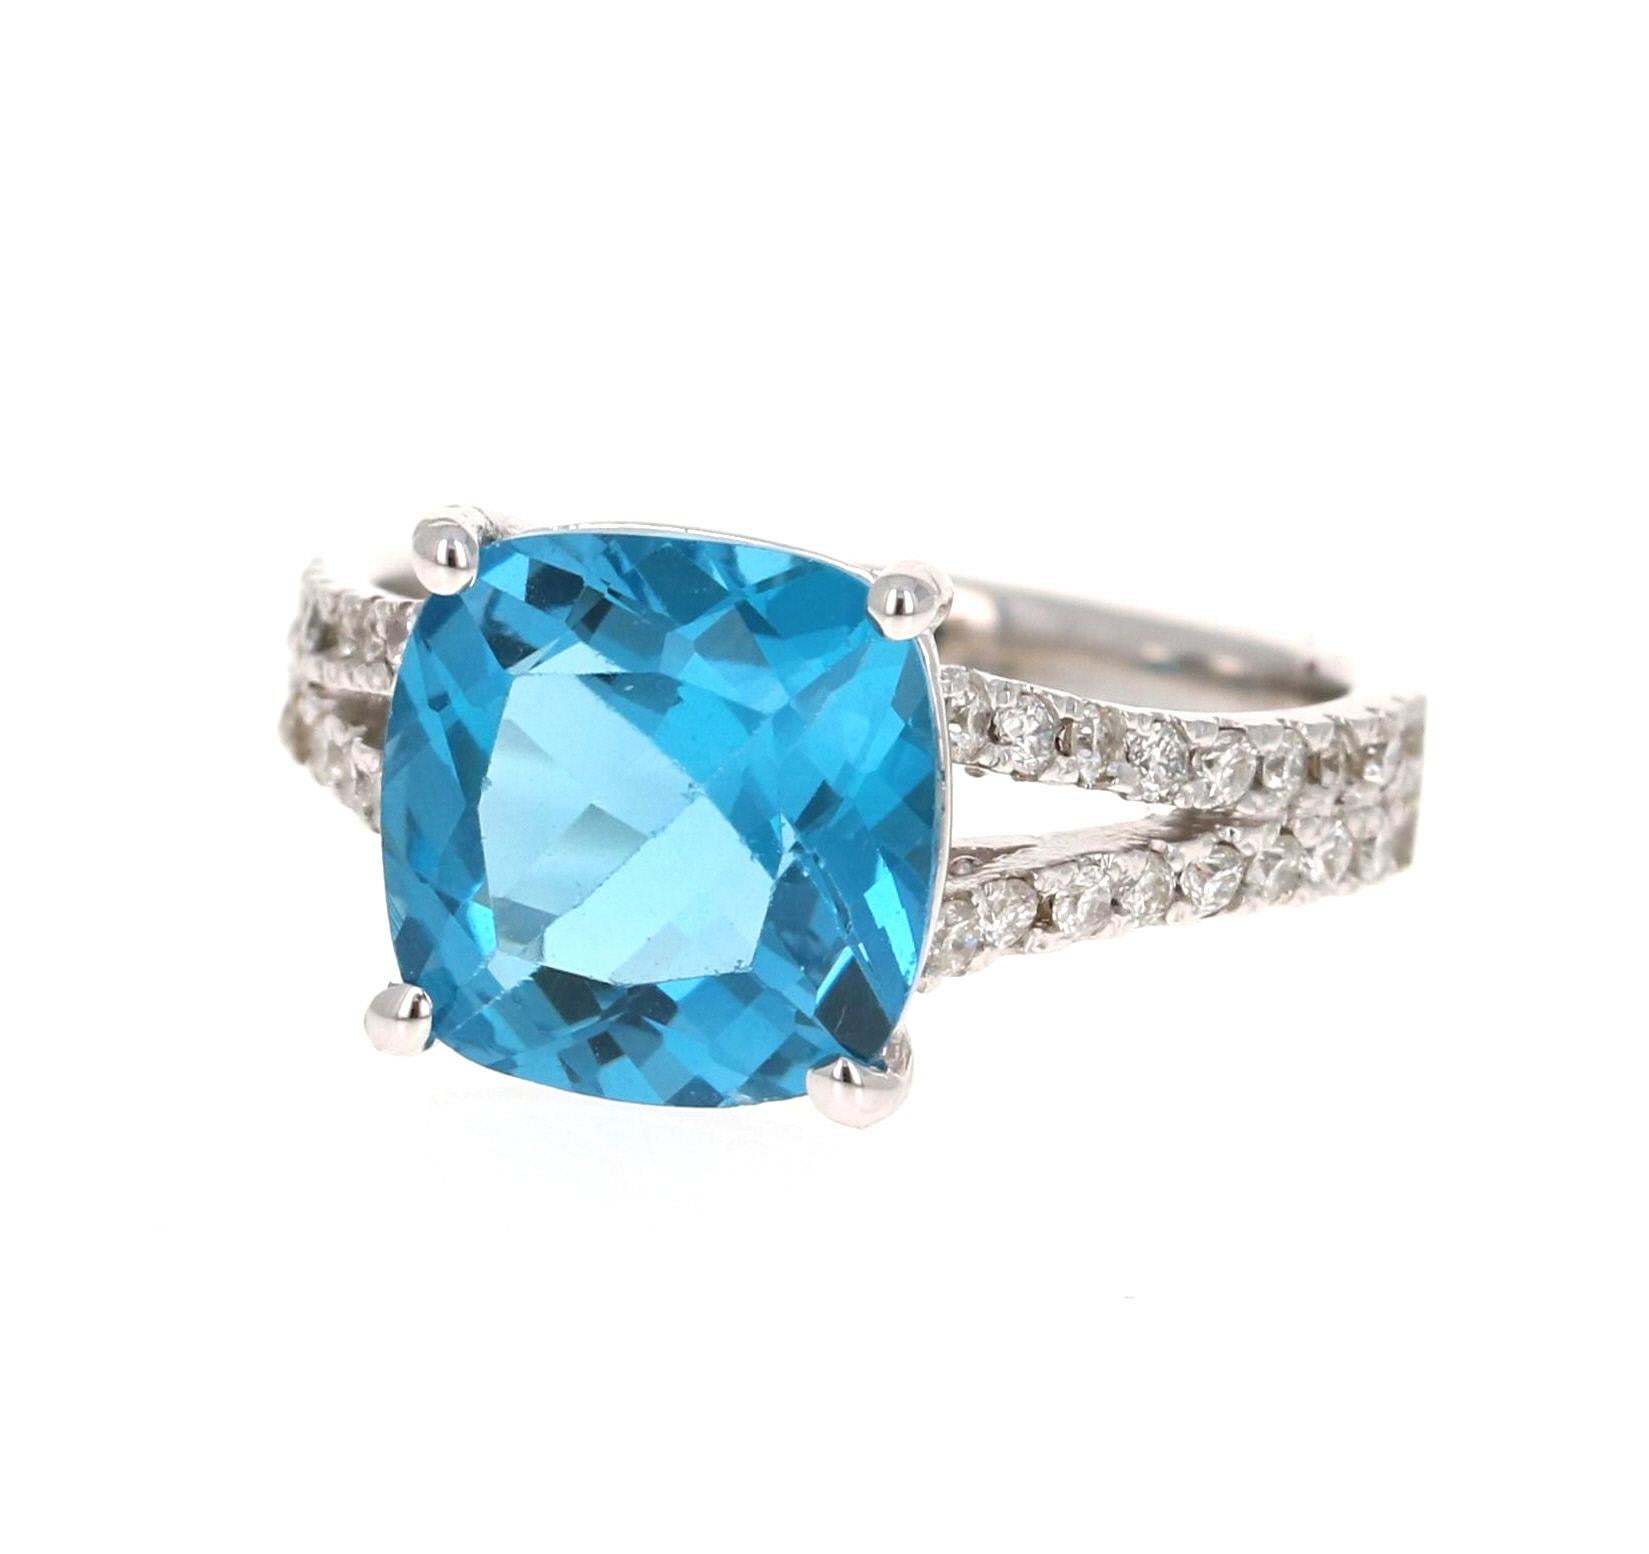 Stunning Cushion Cut Blue Topaz and Diamond ring has a gorgeous Blue Topaz that weighs 4.66 Carats. It is surrounded by 36 Round Cut Diamonds along the shank of the ring that weigh 0.42 Carats. The total carat weight of the ring is 5.08 Carats.